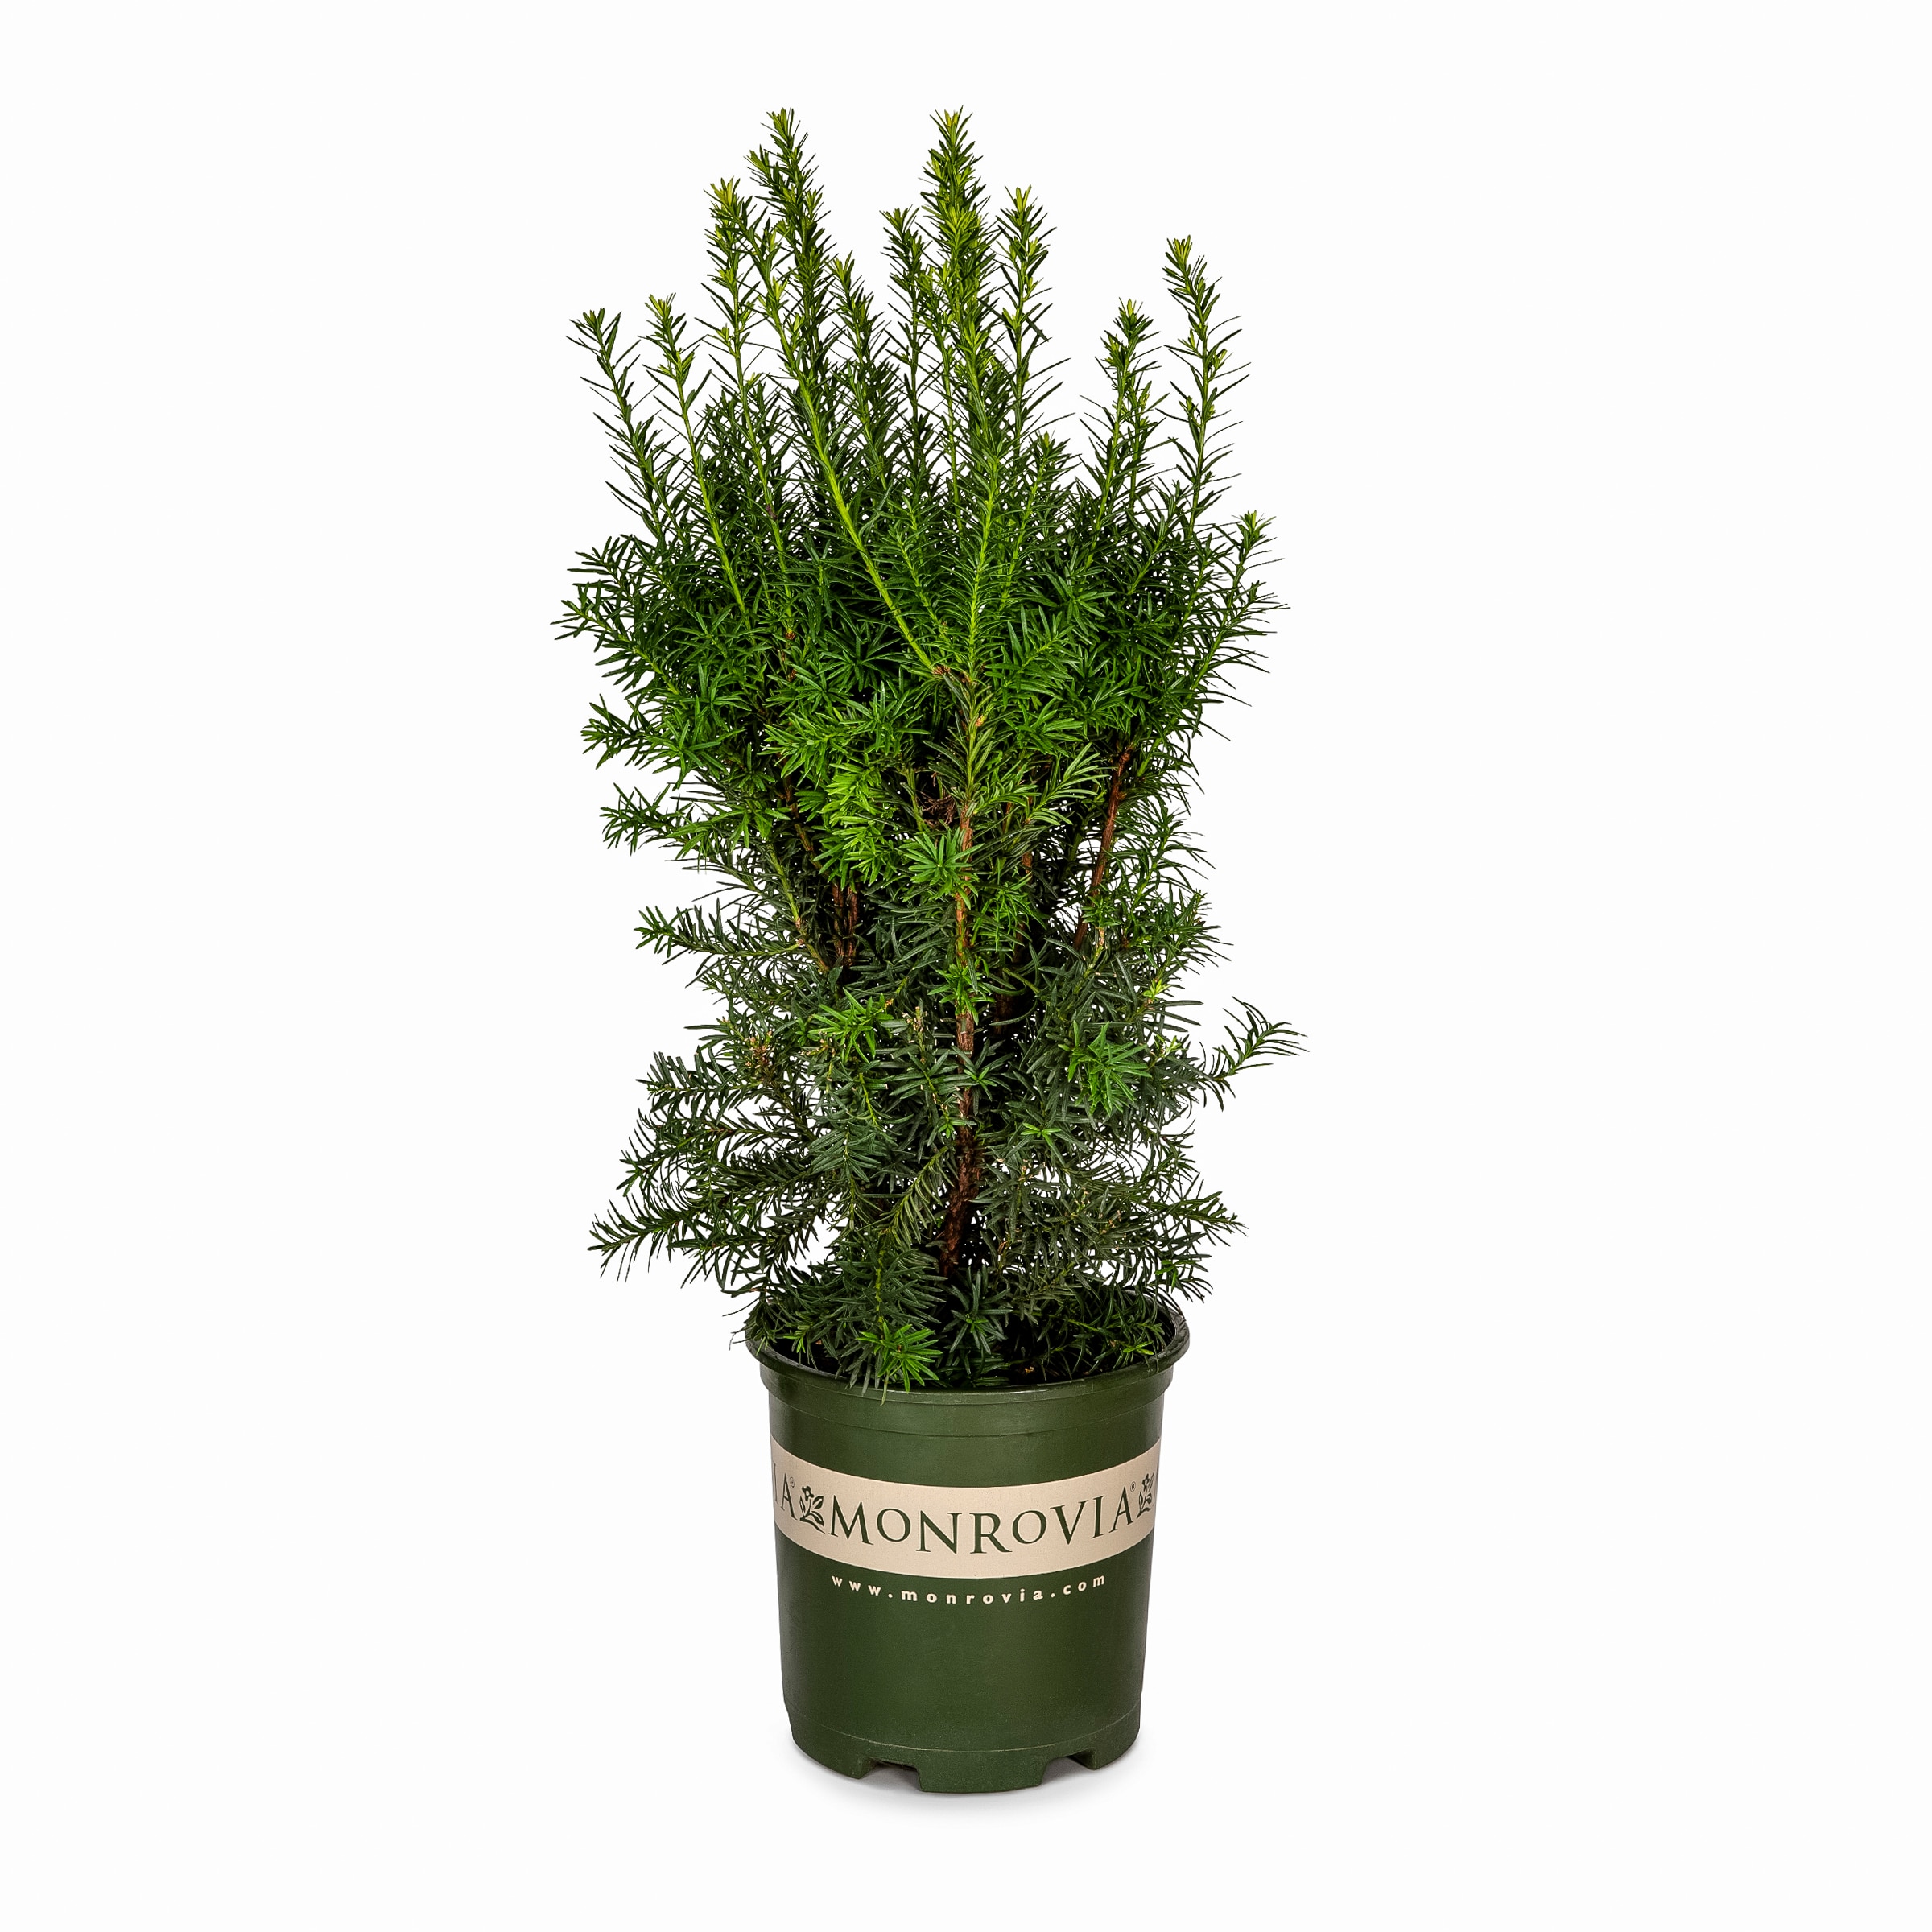 Hick's Yew Plants, Bulbs & Seeds at Lowes.com